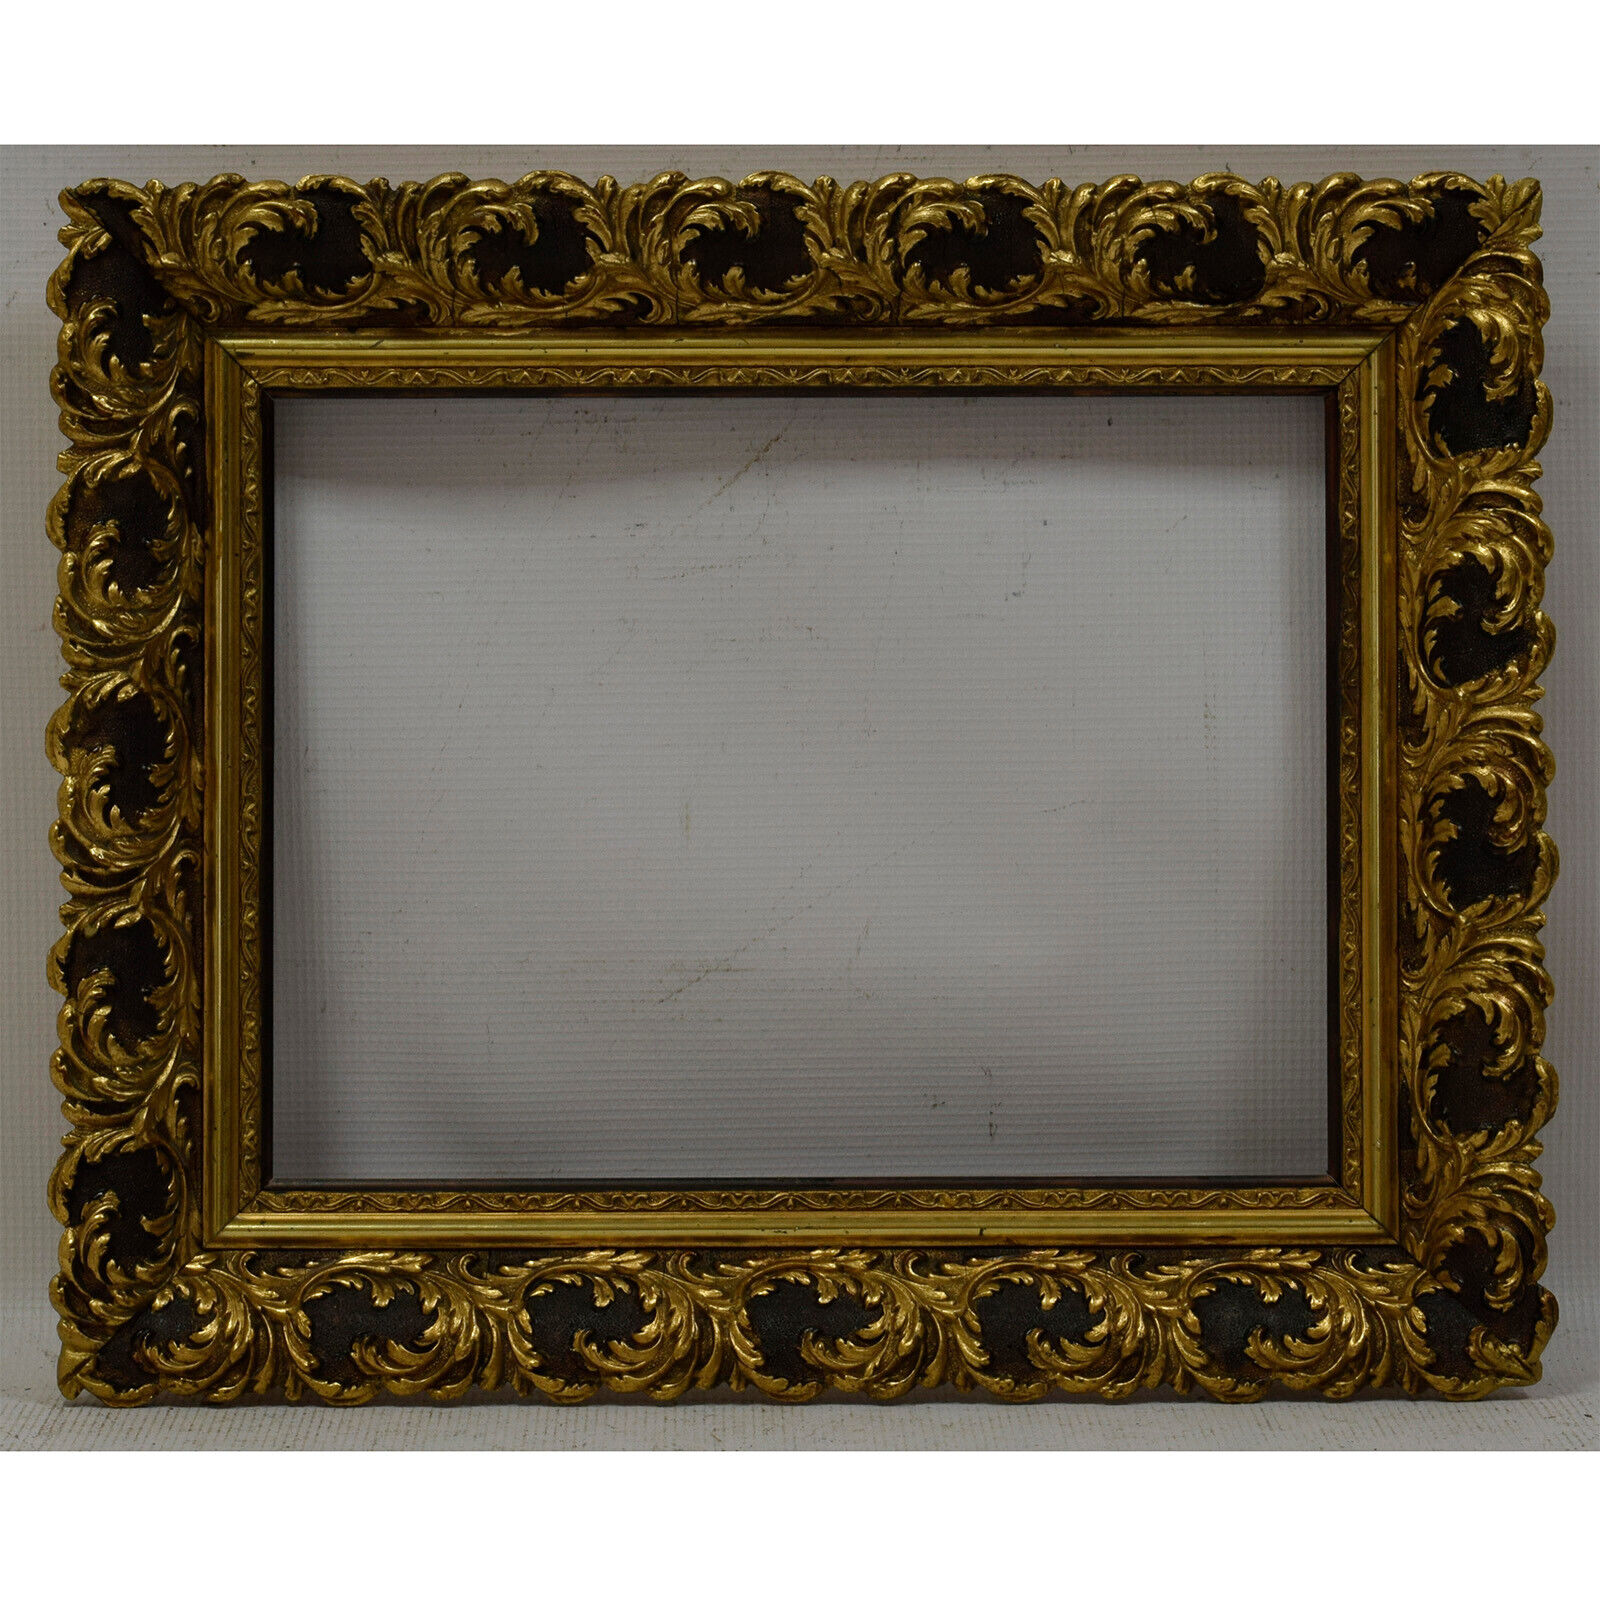 1904 Old wooden frame decorative Original condition Internal: 13,1x10 in